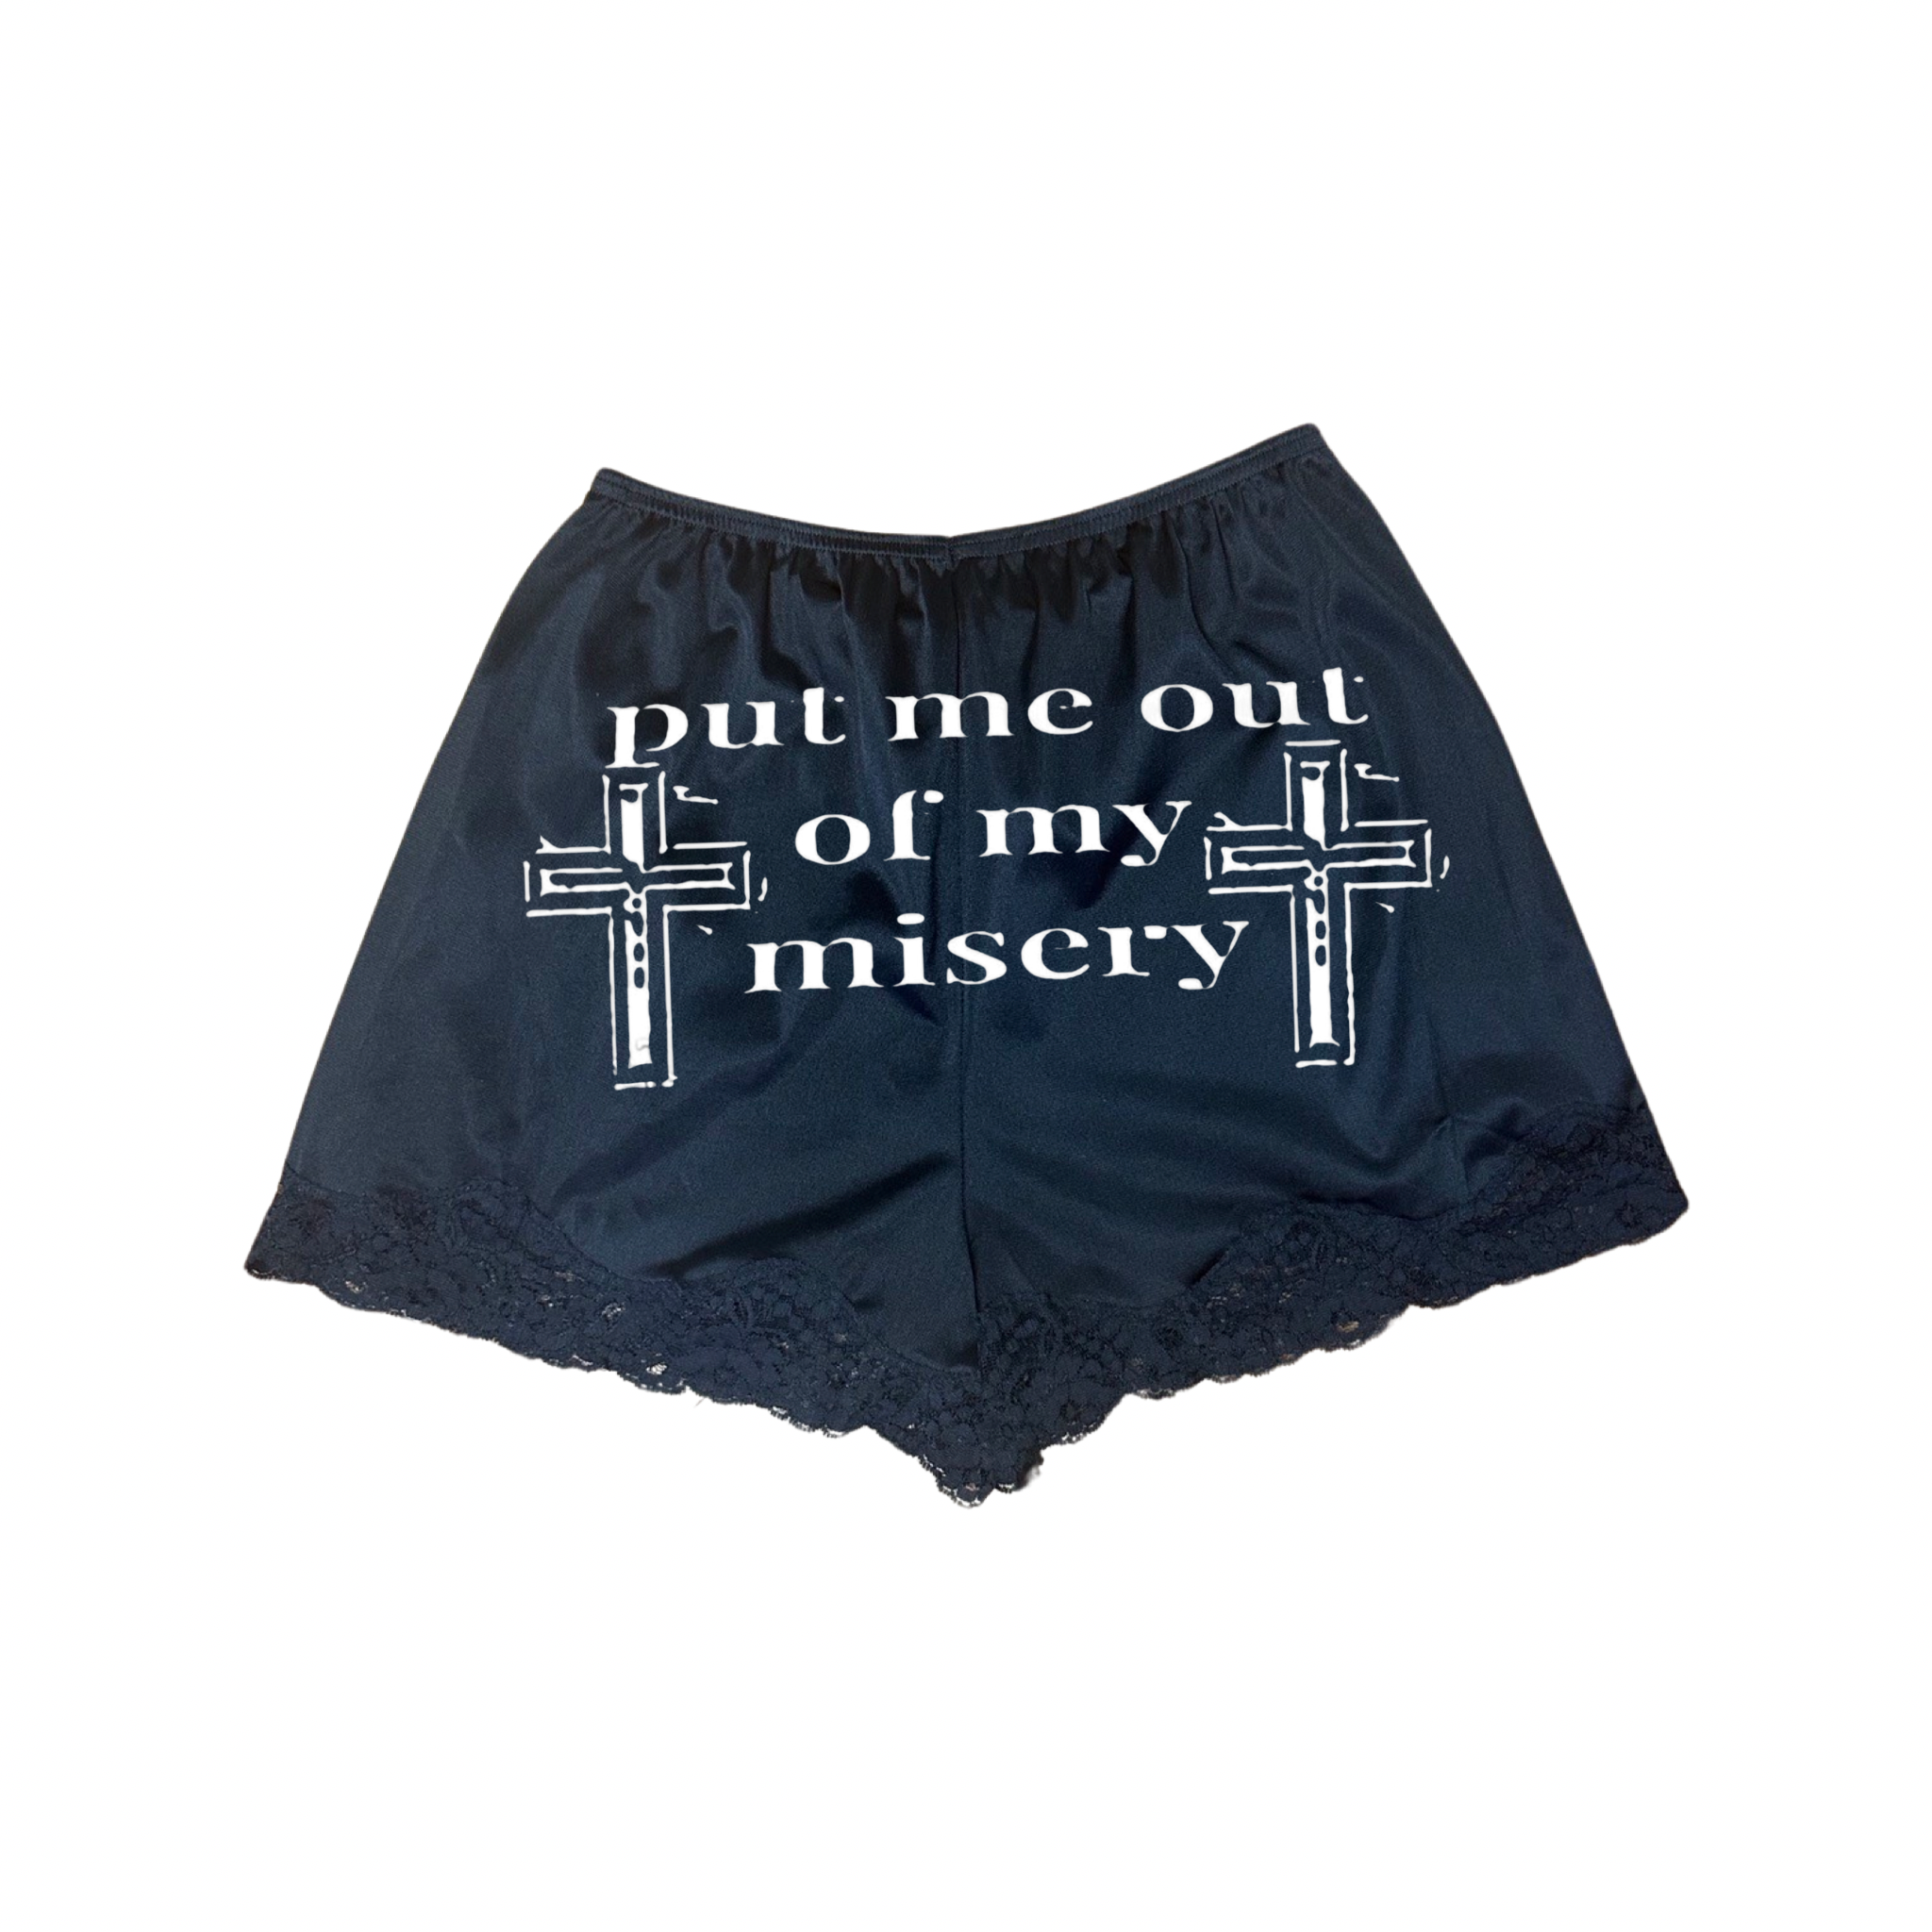 PUT ME OUT OF MY MISERY SHORTS (black)